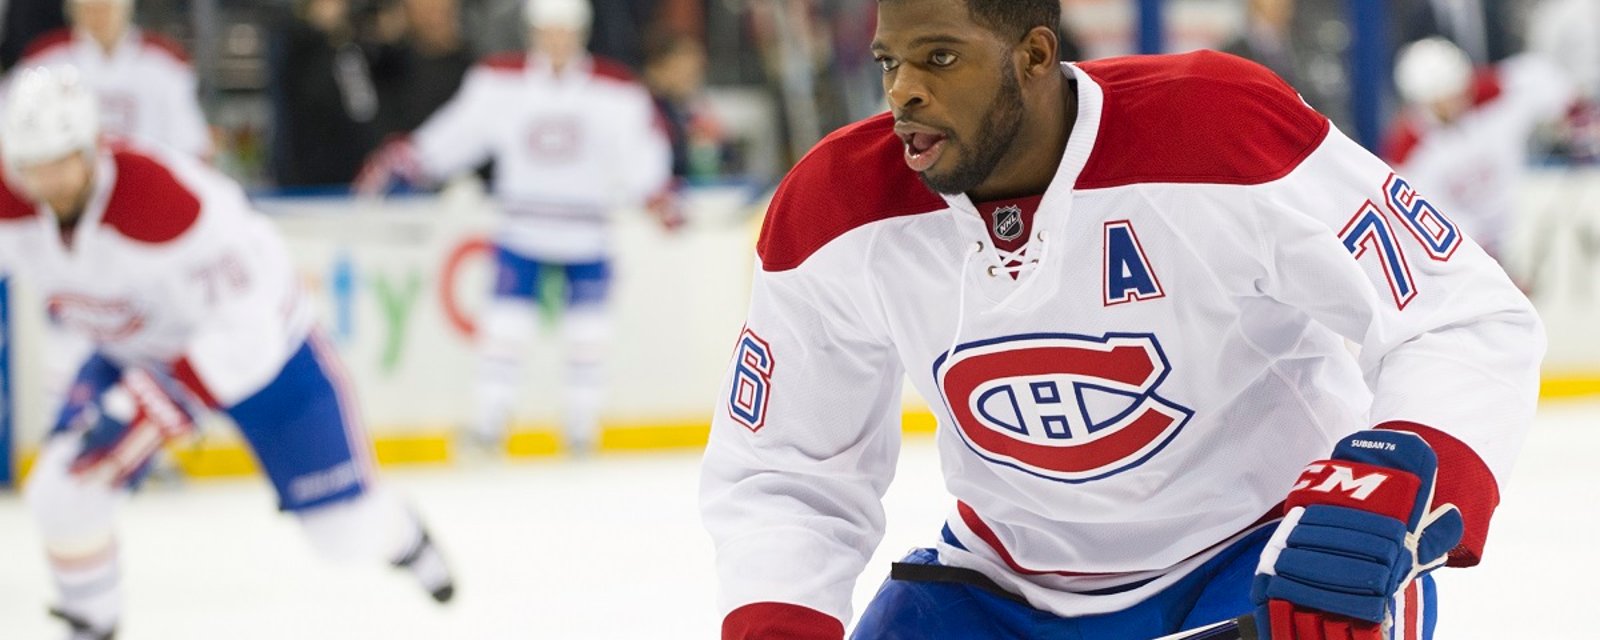 P.K. Subban reveals the real reason he was traded by the Canadiens.